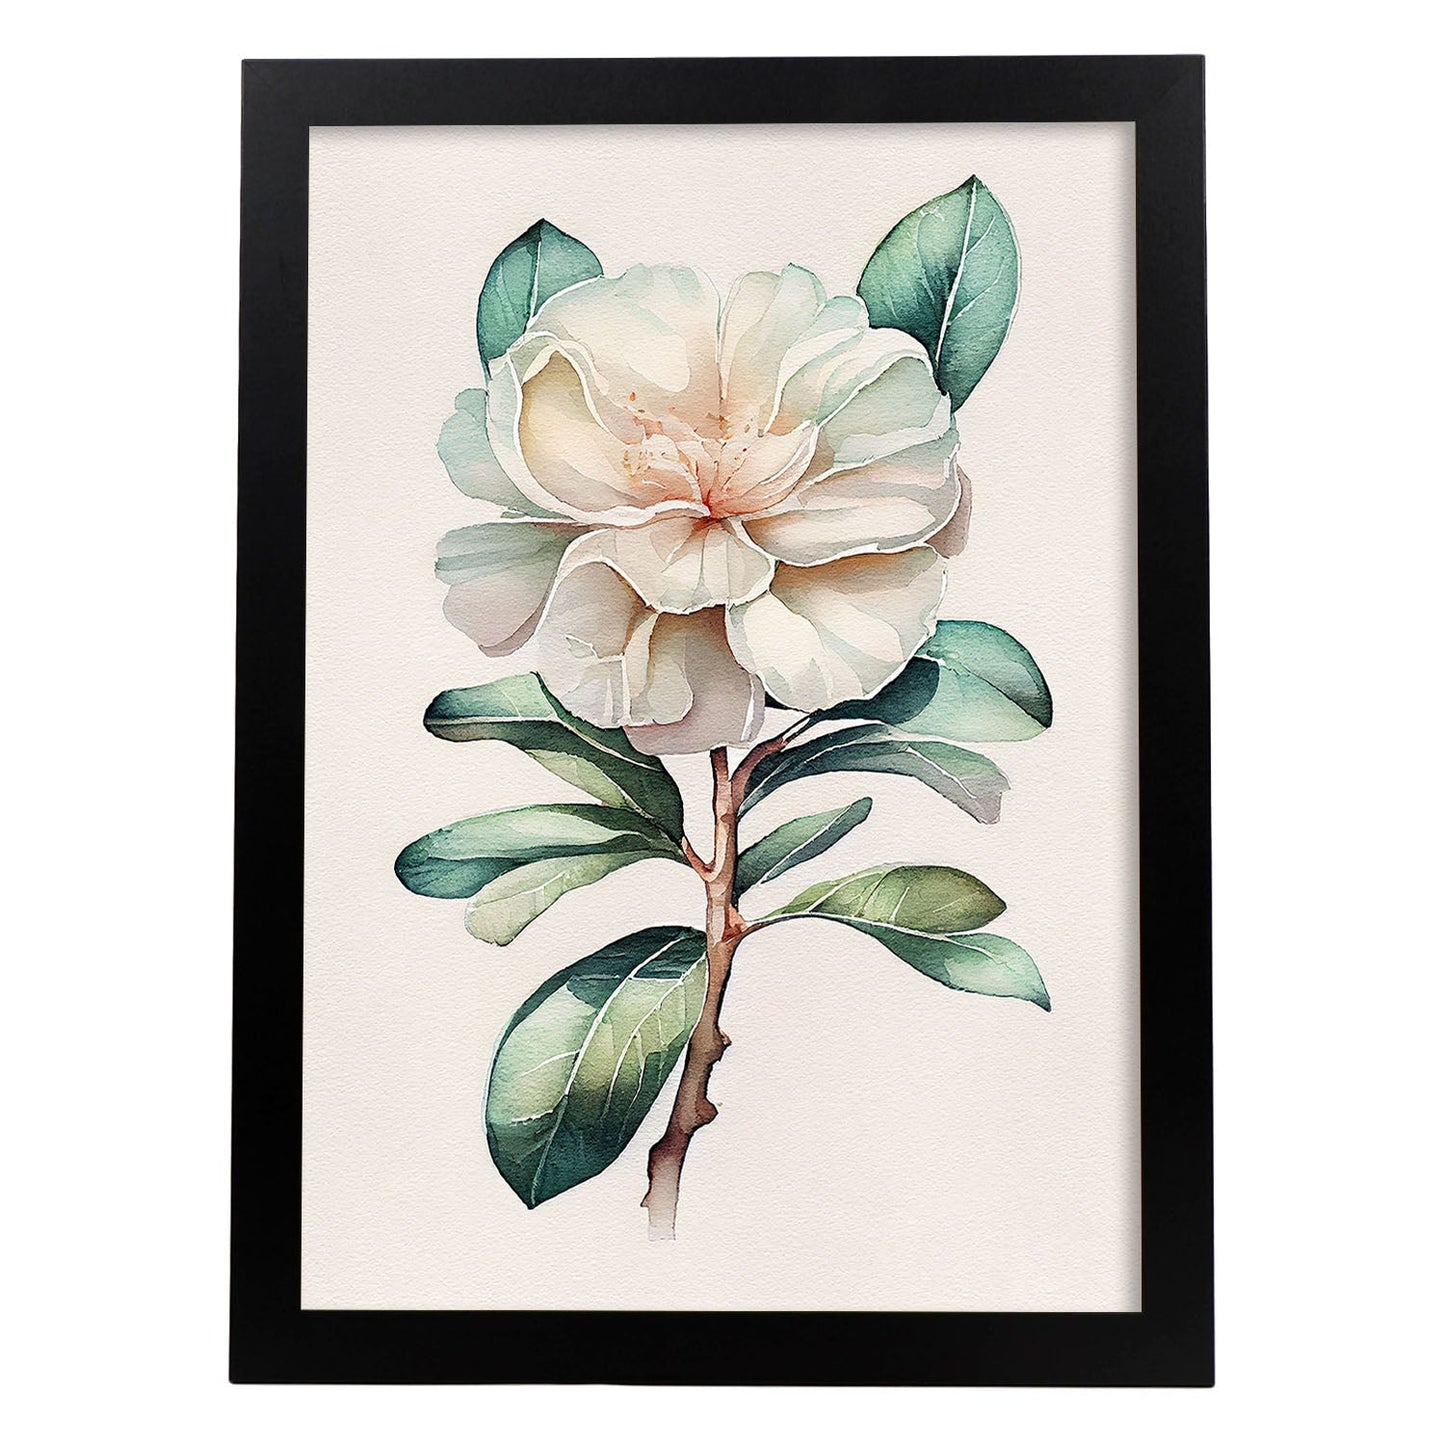 Nacnic watercolor minmal Camellia_1. Aesthetic Wall Art Prints for Bedroom or Living Room Design.